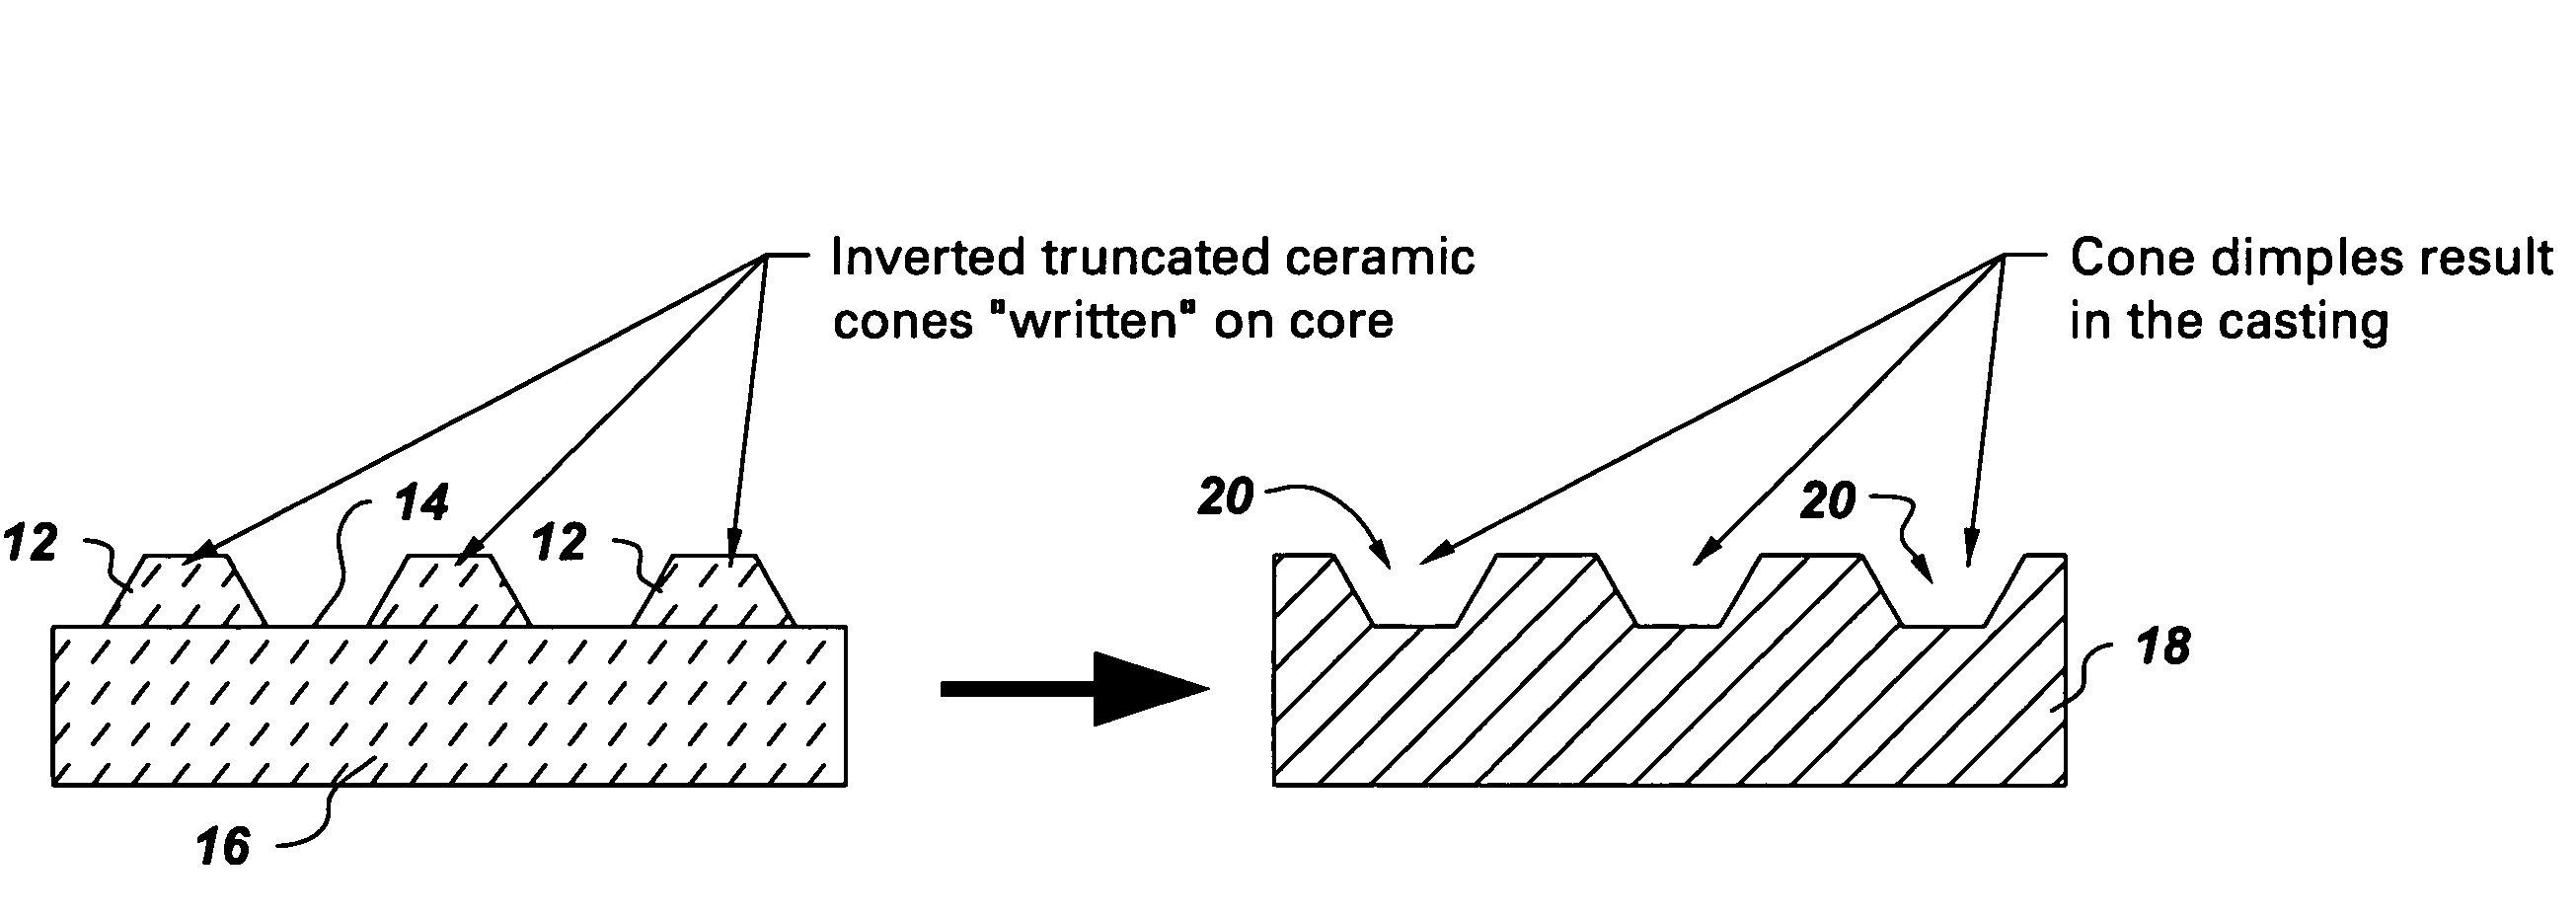 Method of forming concavities in the surface of a metal component, and related processes and articles